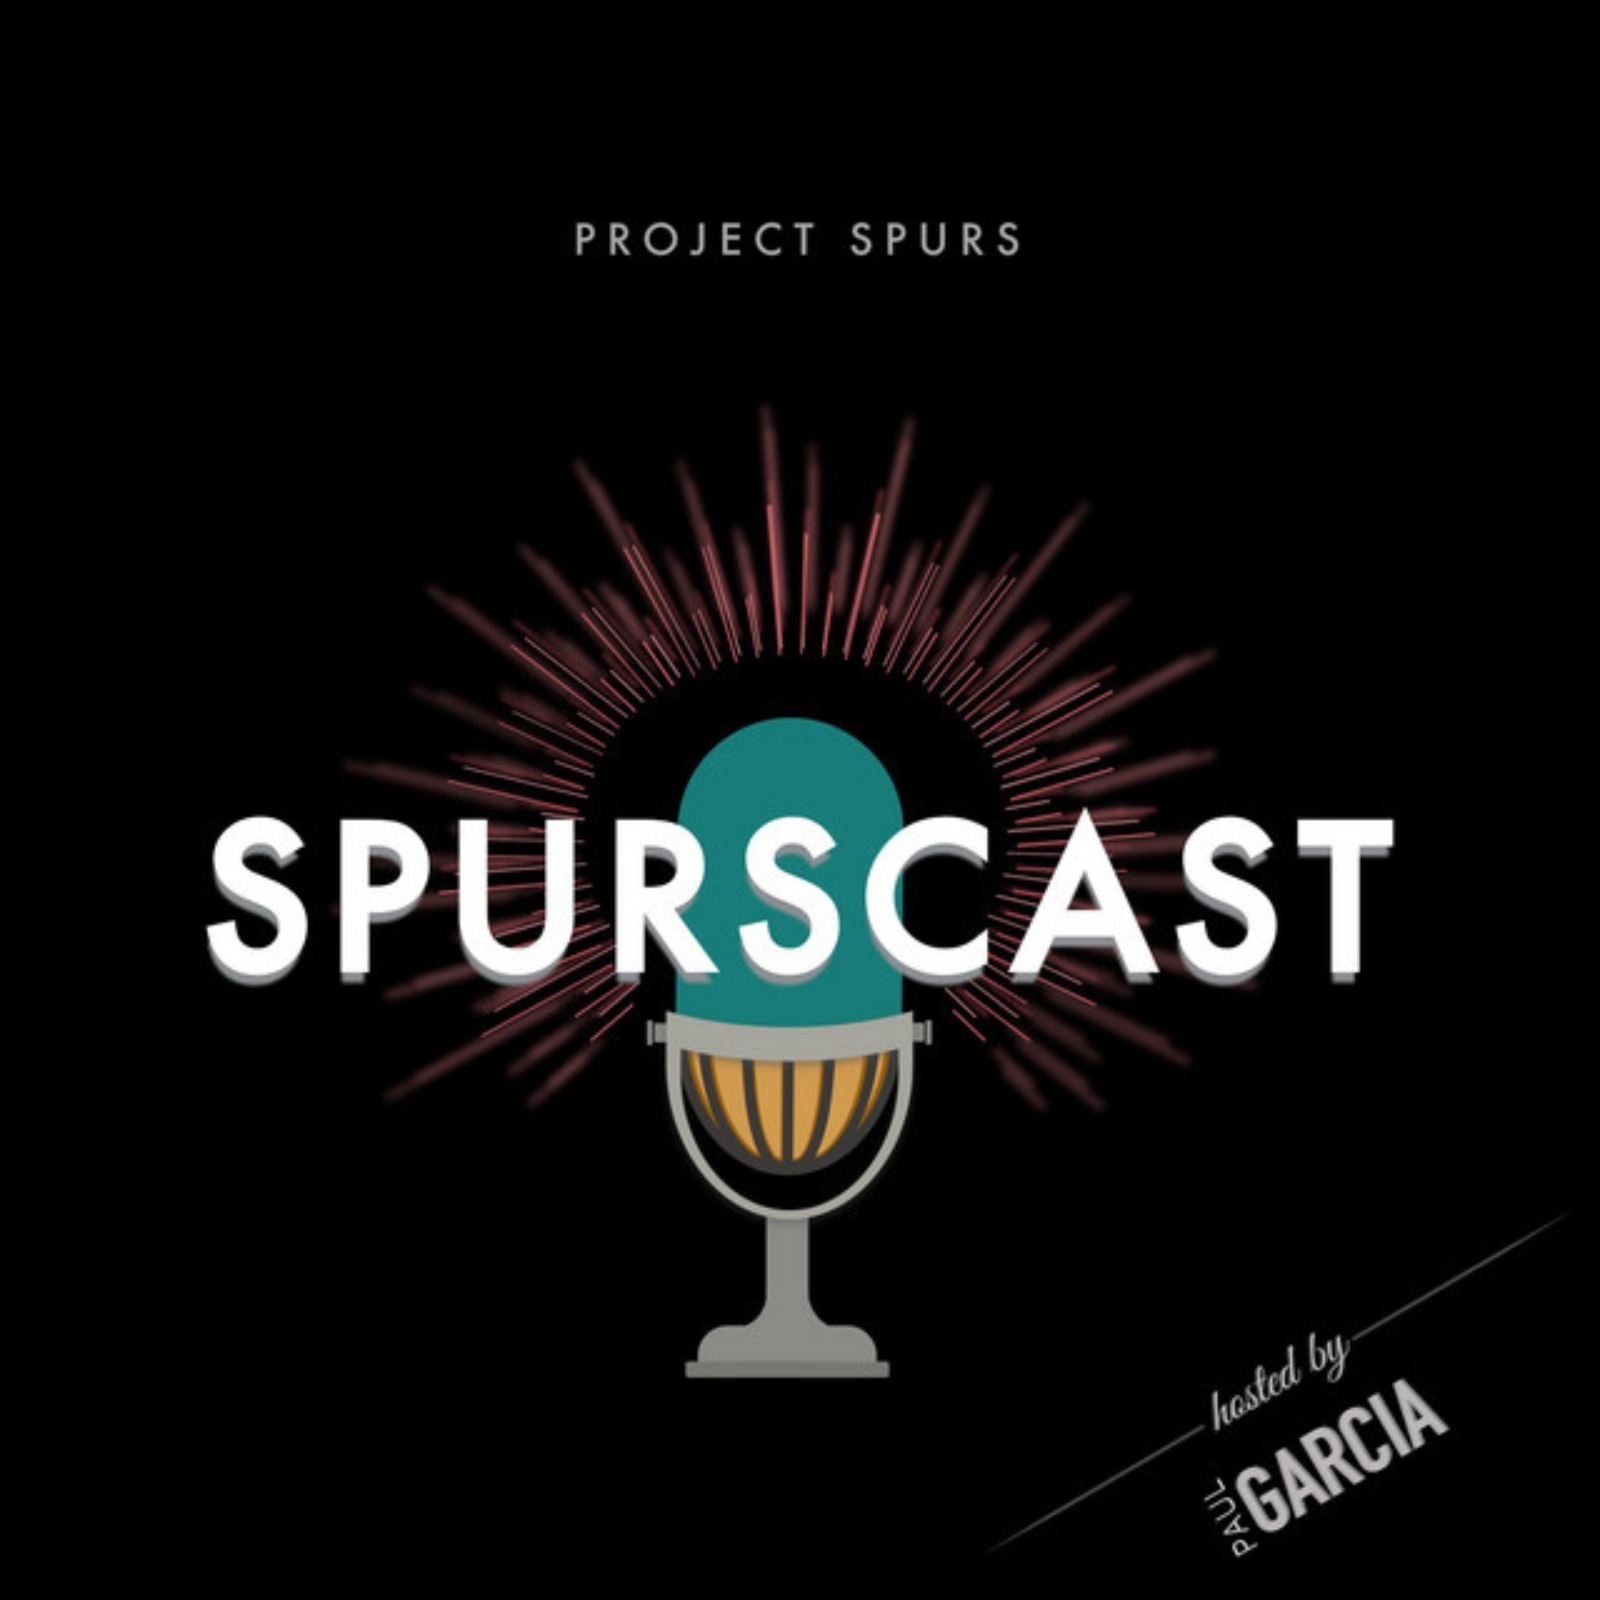 Spurscast Ep. 737: Draft Prospects in March Madness, Kyrie Irving Compliments Wemby’s Defense